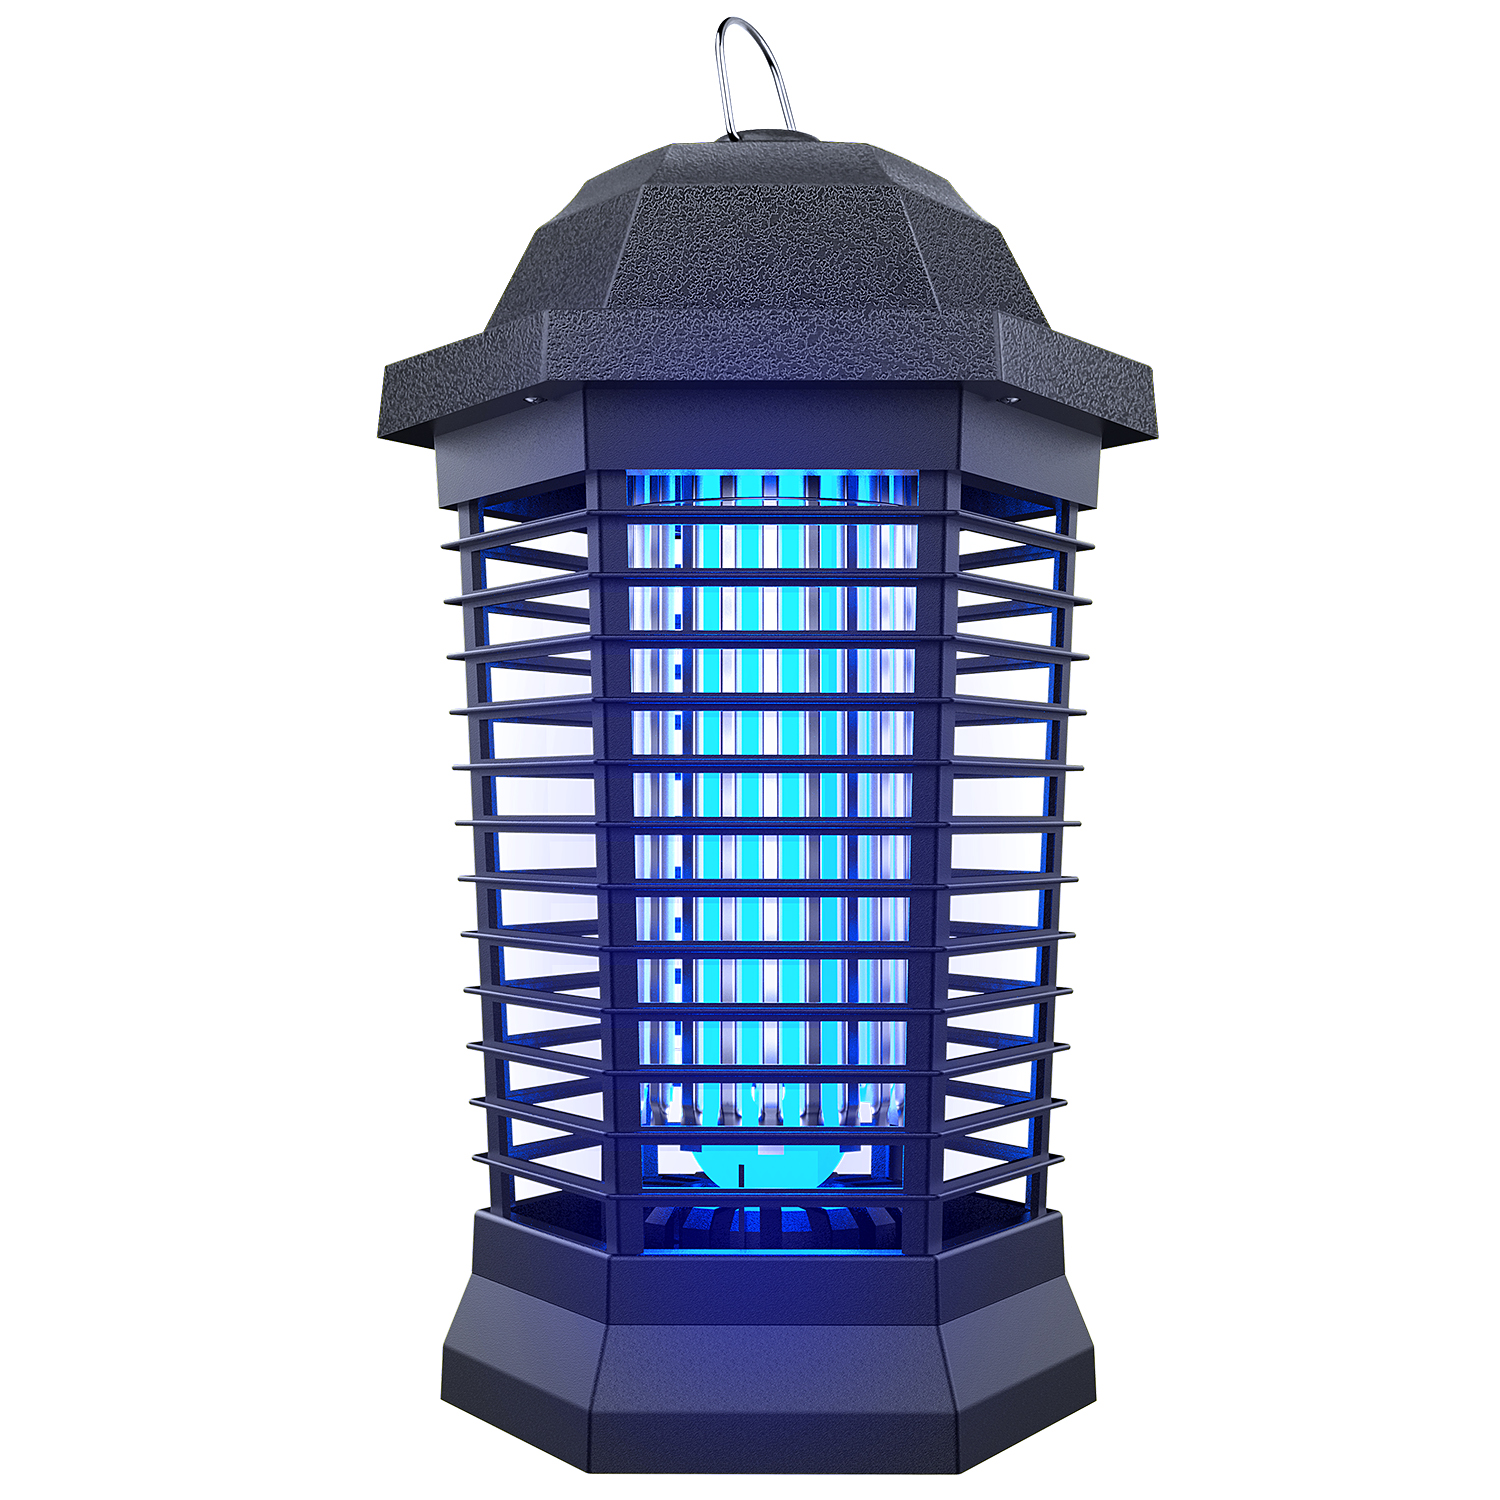 Klahaite Bug Zapper Outdoor Electric, Mosquito Zapper Indoor, Fly Zapper,  Fly Trap, Insect Trap for Garden Backyard Patio,3 Prong Plug, Black